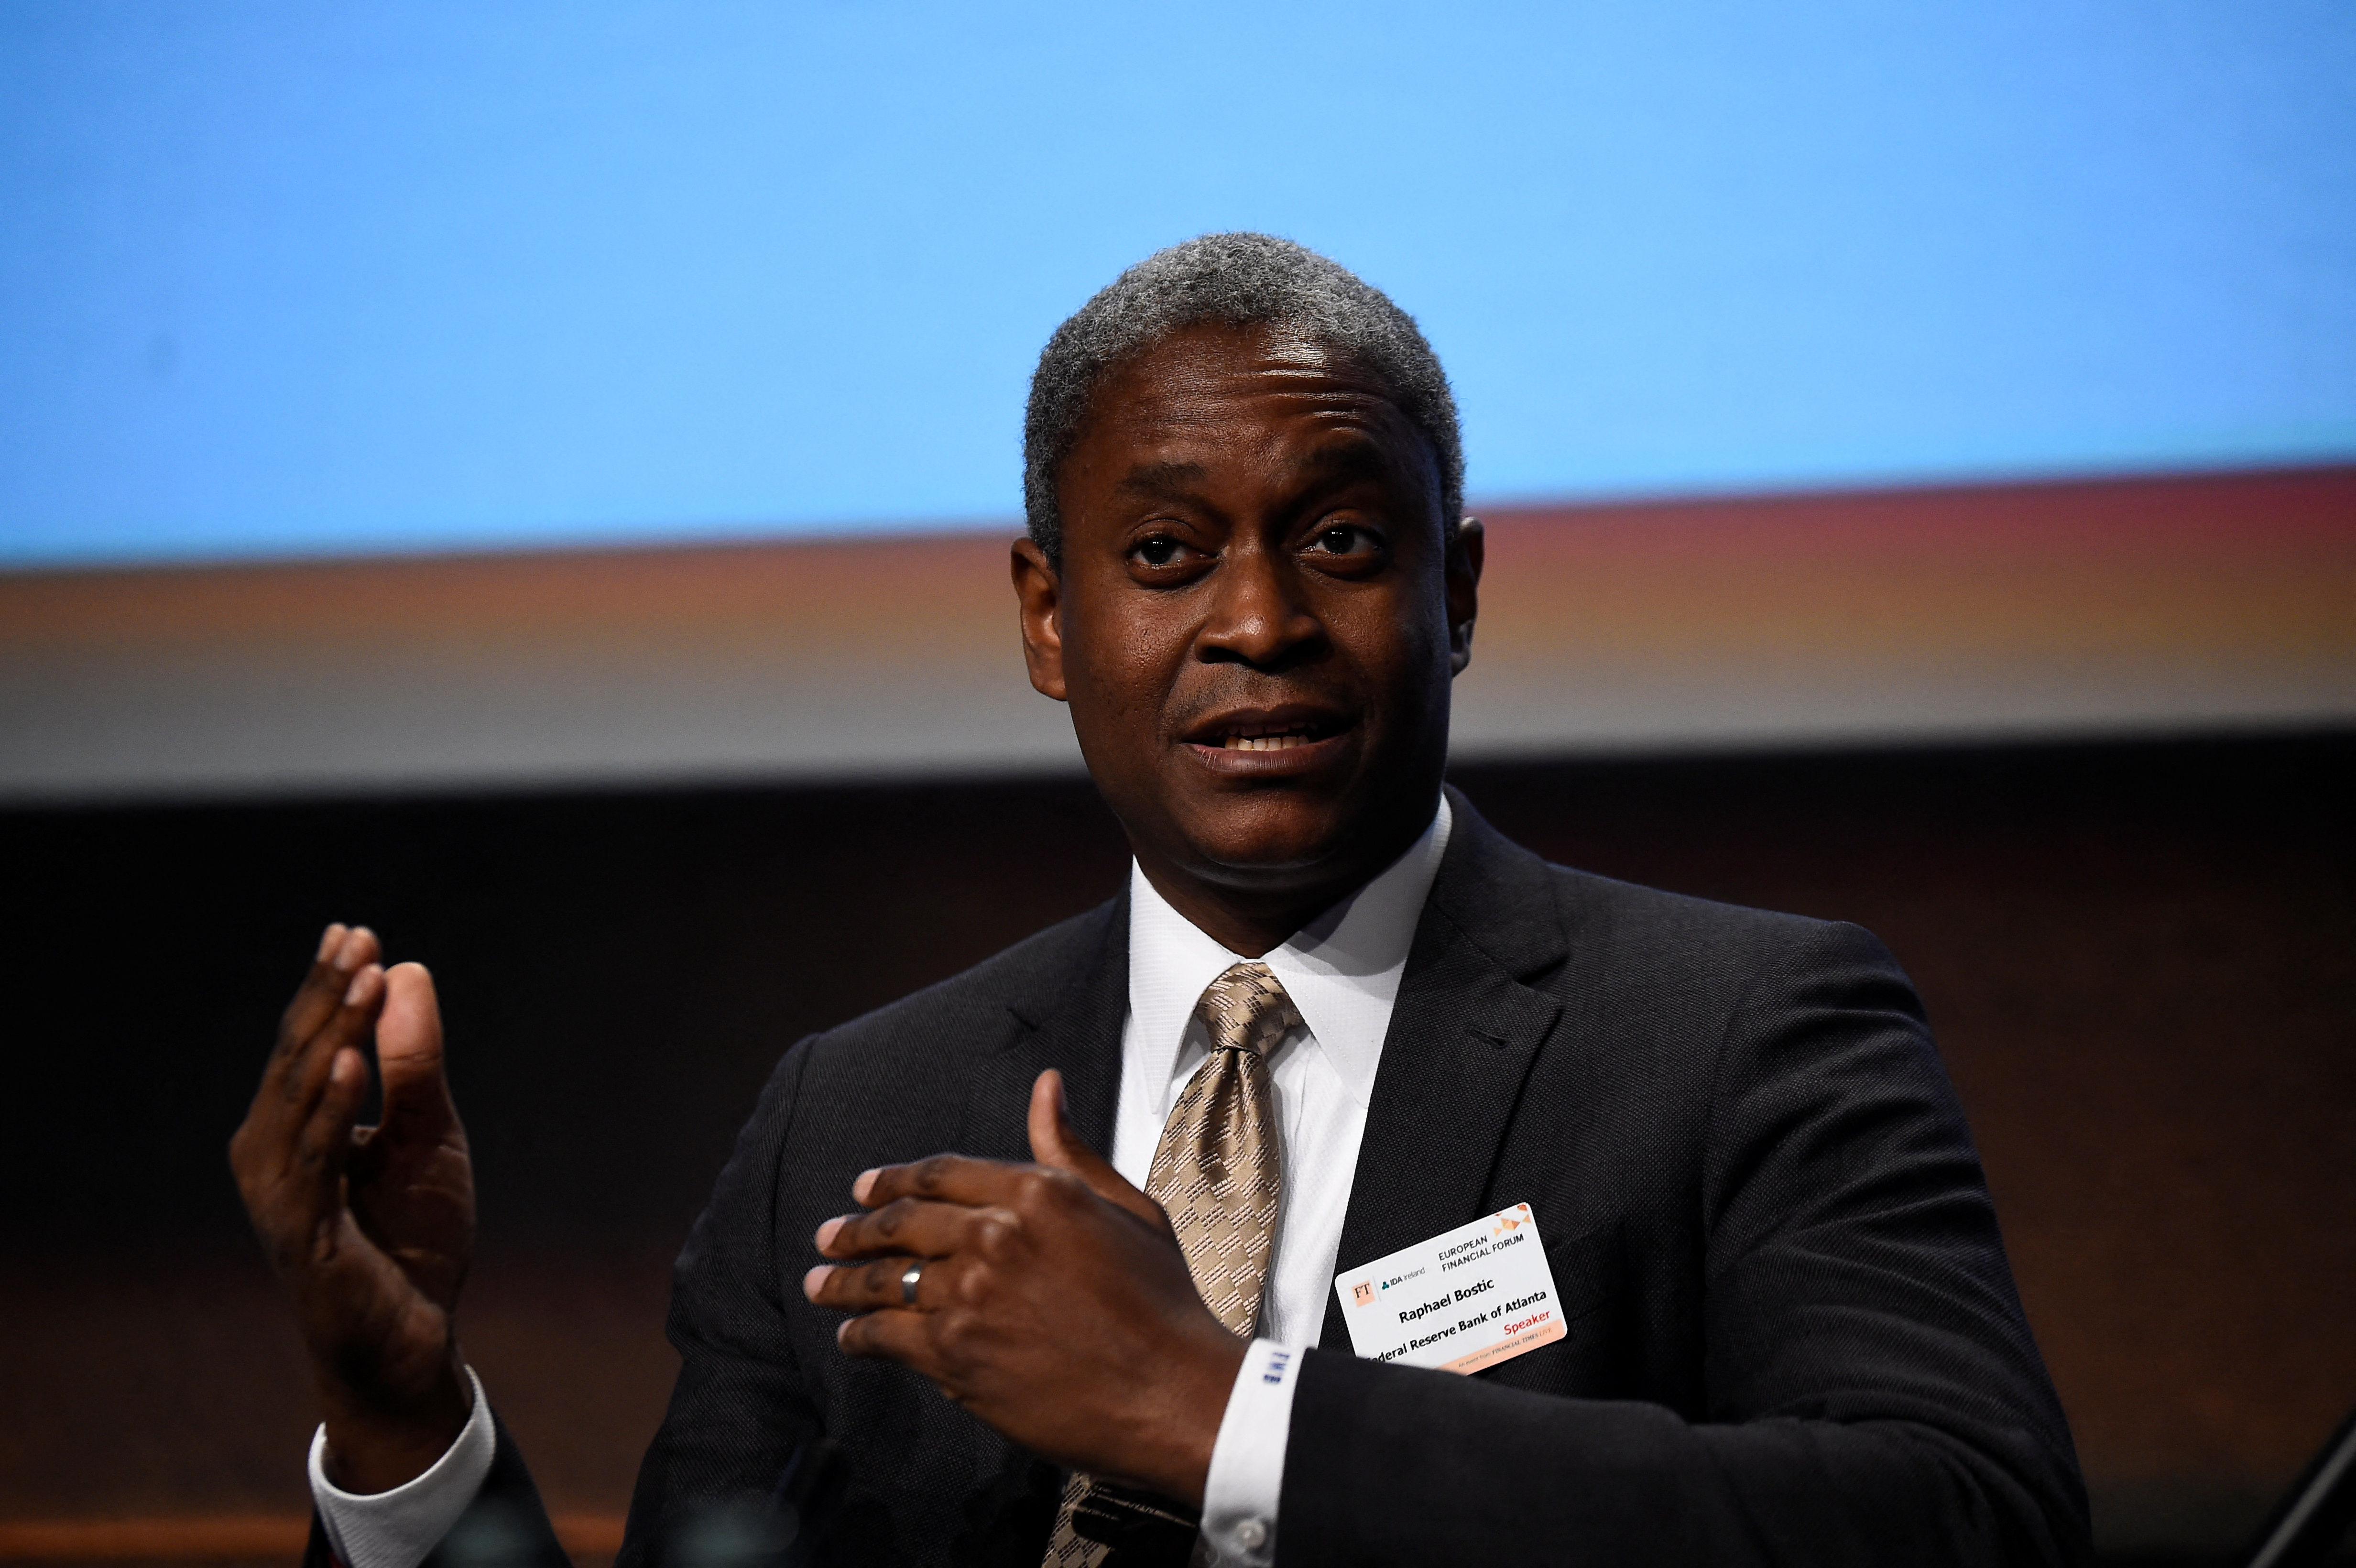 President and Chief Executive Officer of the Federal Reserve Bank of Atlanta Raphael W. Bostic speaks at a European Financial Forum event in Dublin